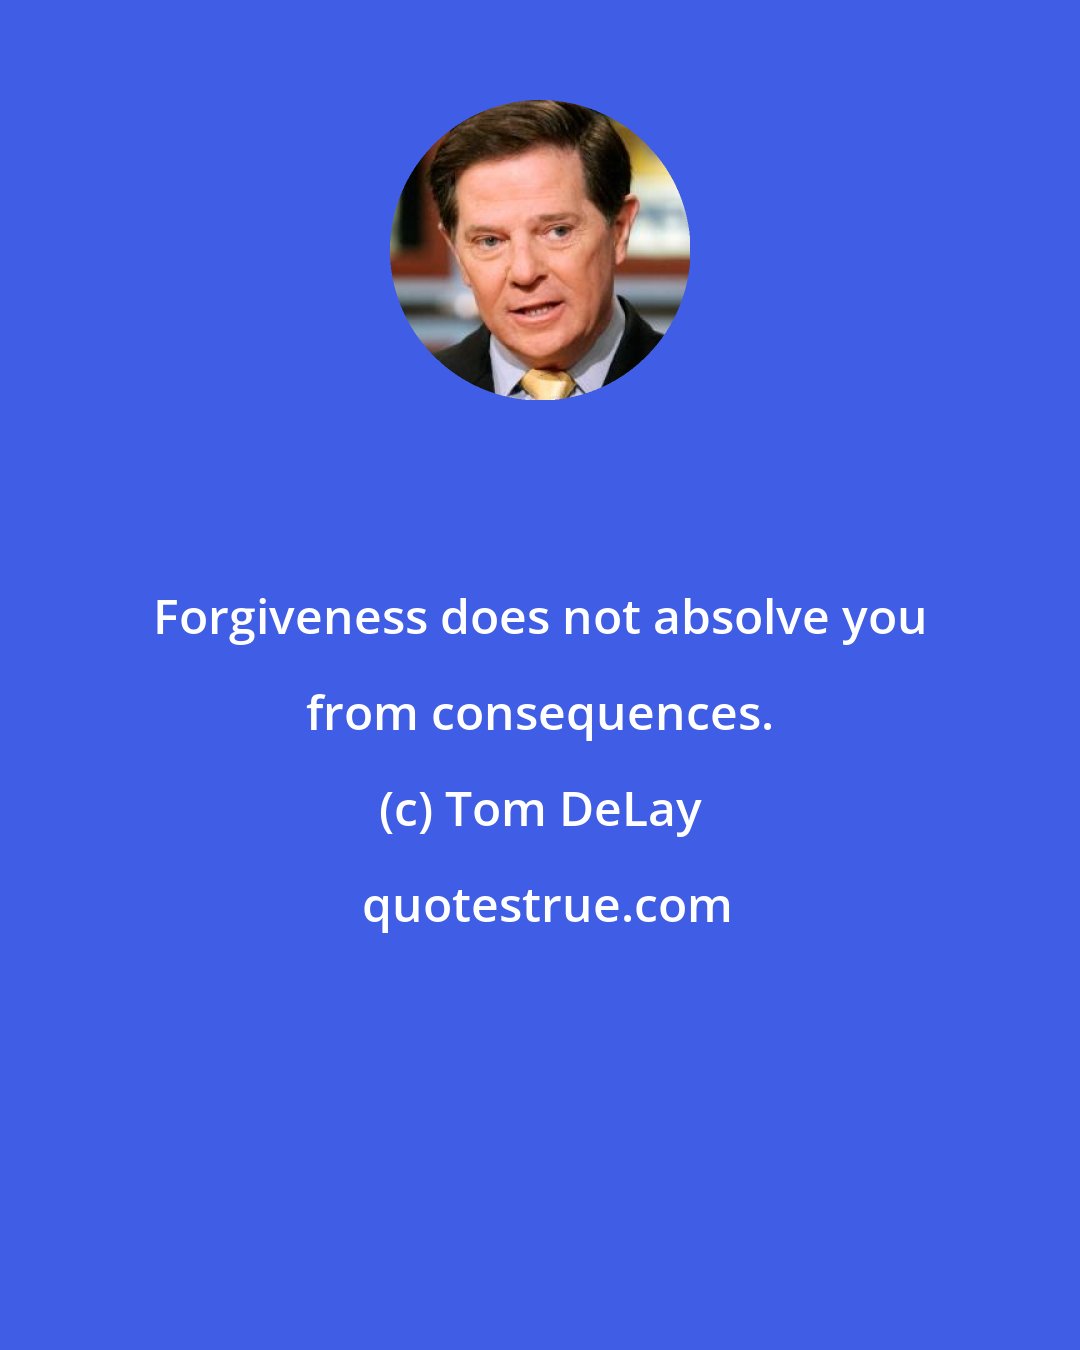 Tom DeLay: Forgiveness does not absolve you from consequences.